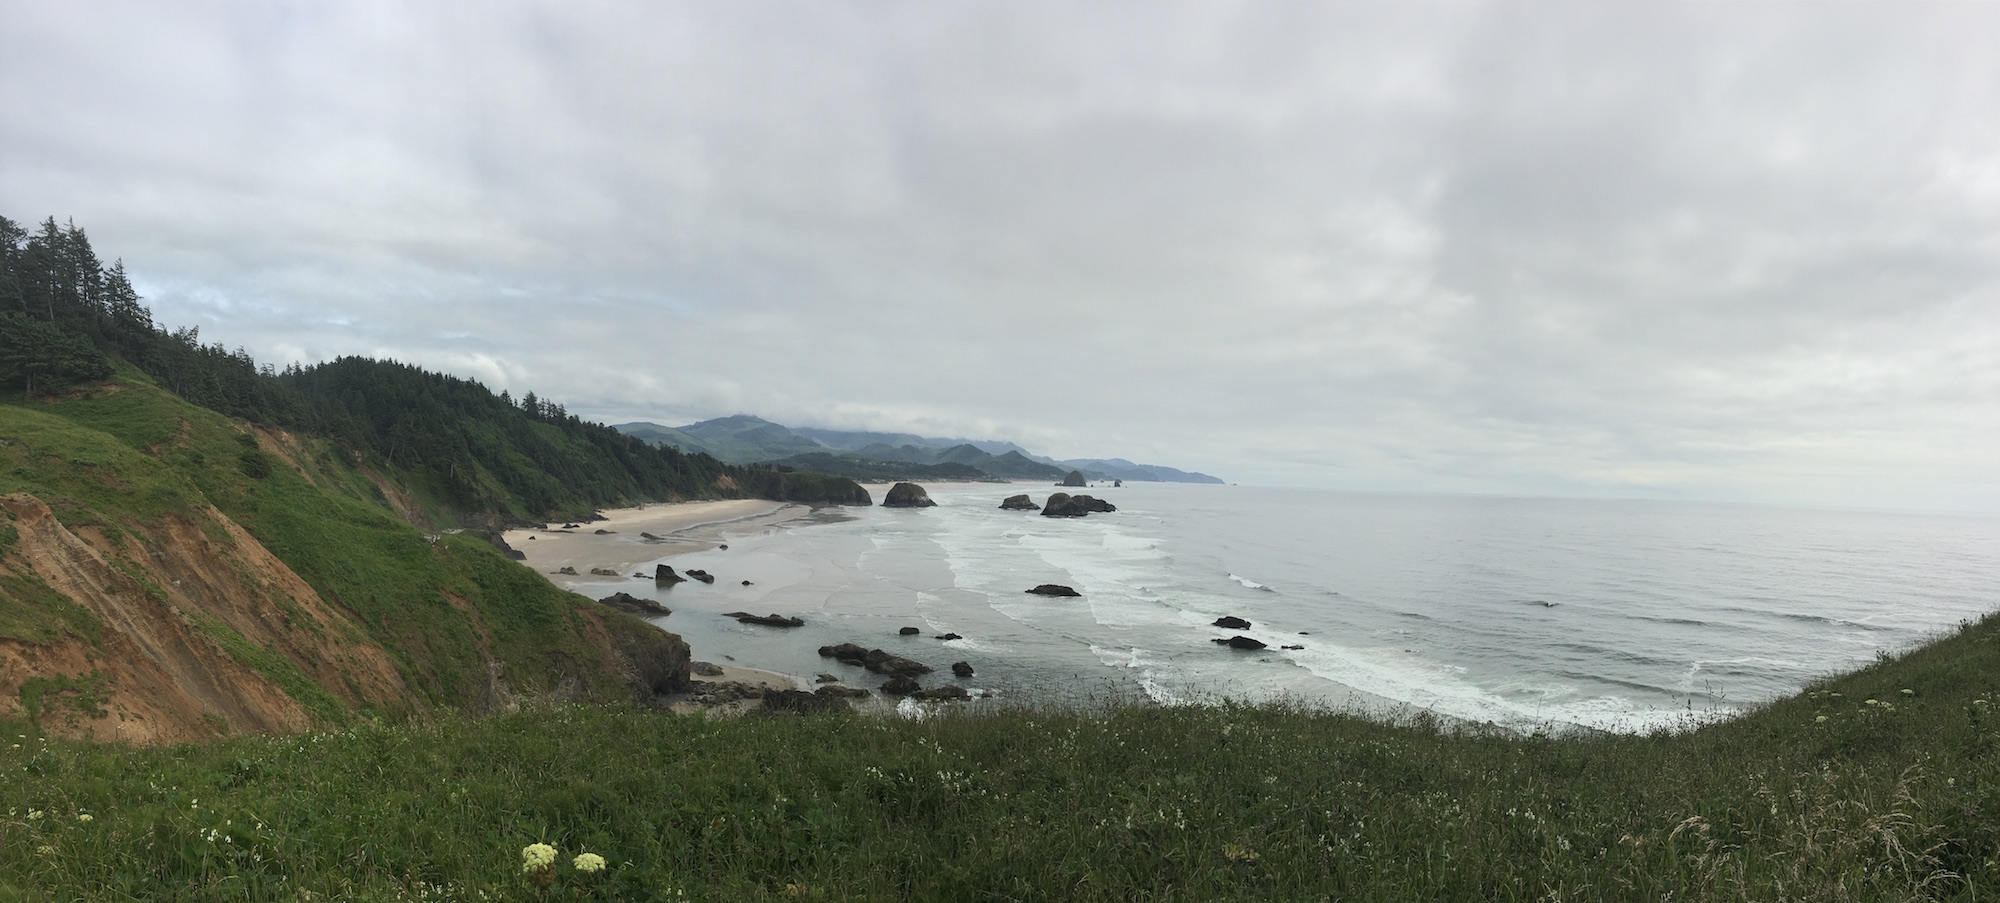 Cannon Beach, taken from Ecola State Park, OR